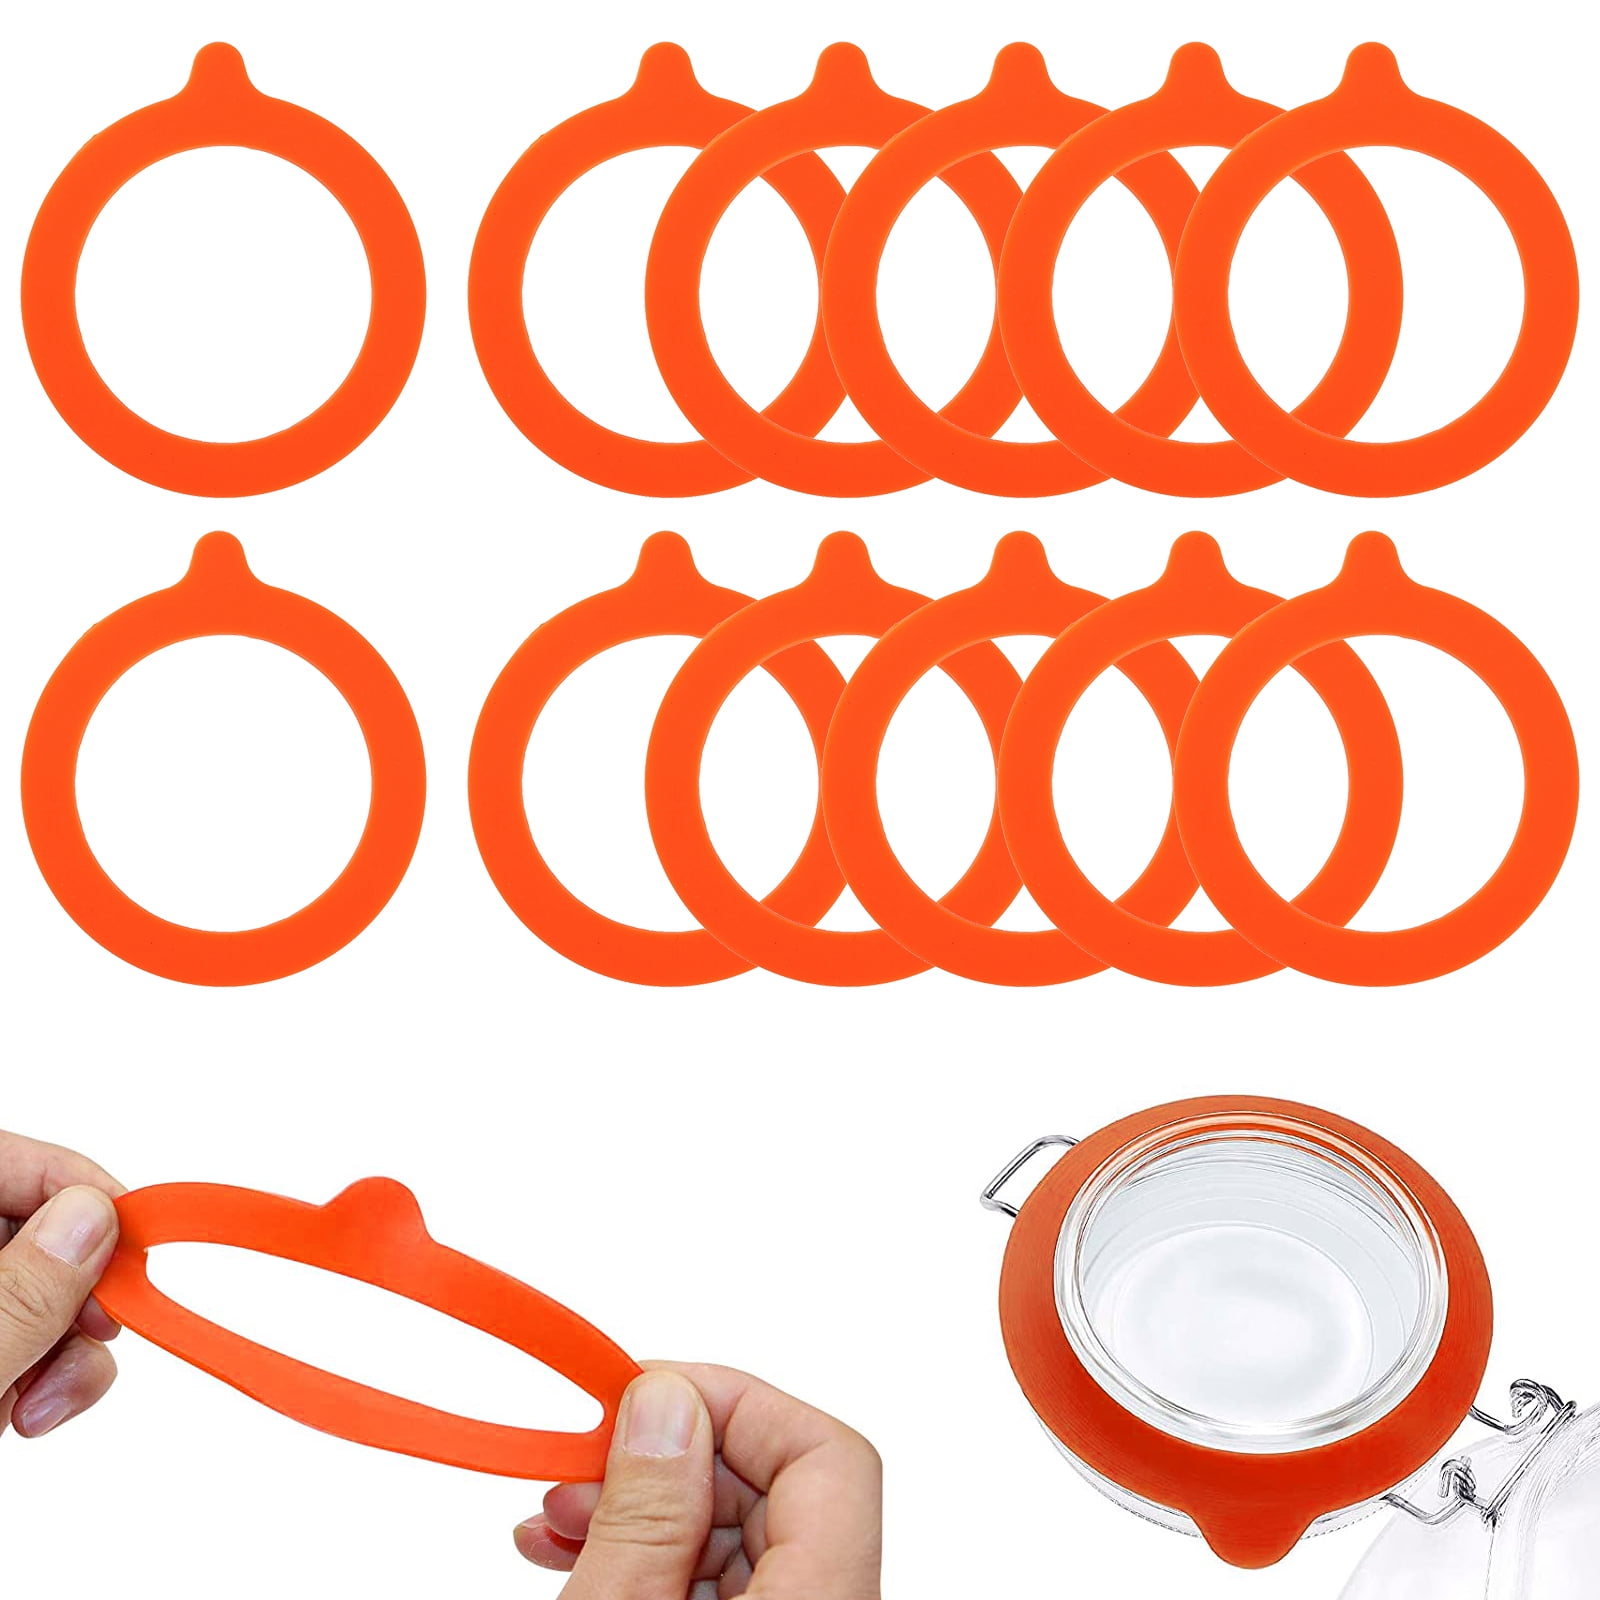 Airtight Silicone Gasket Sealing Rings for Glass Clip Top Jar Canning for Leak Proof Mason Jar Lids Silicone Gasket Sealing Rings 10PCS Reusable Food-Grade Airtight Rubber Seal